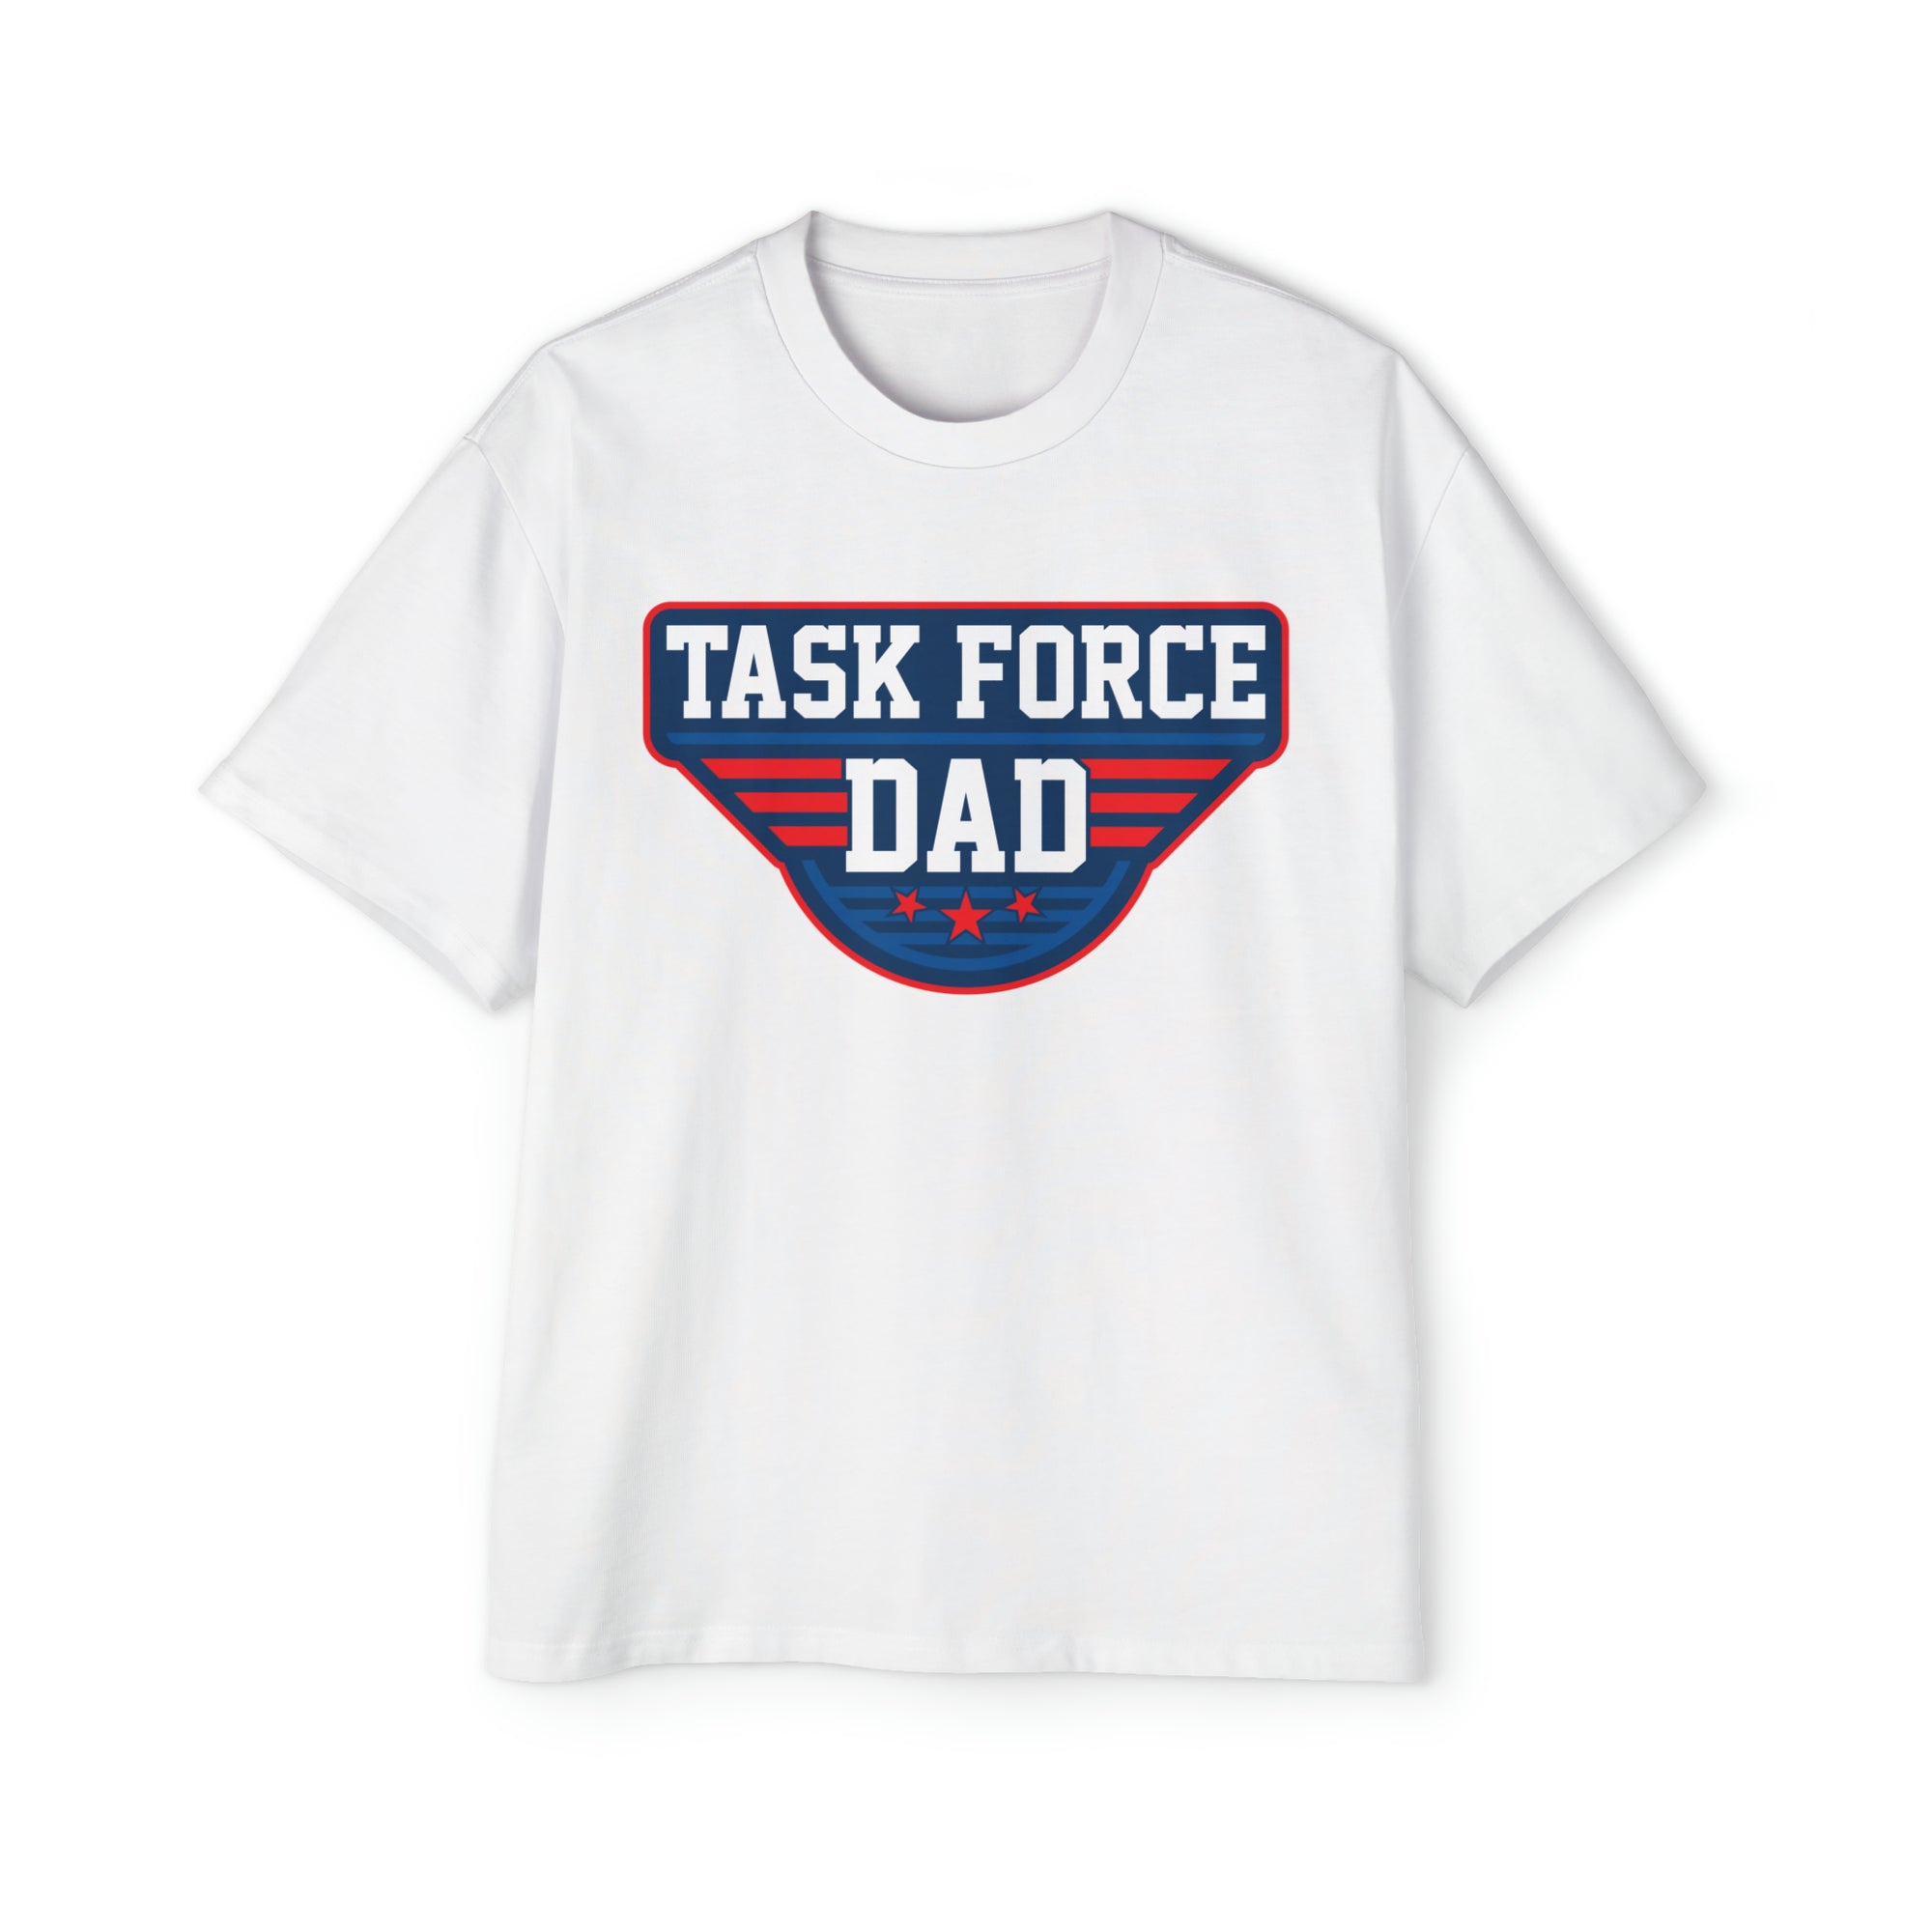 Task Force Dad T-Shirt